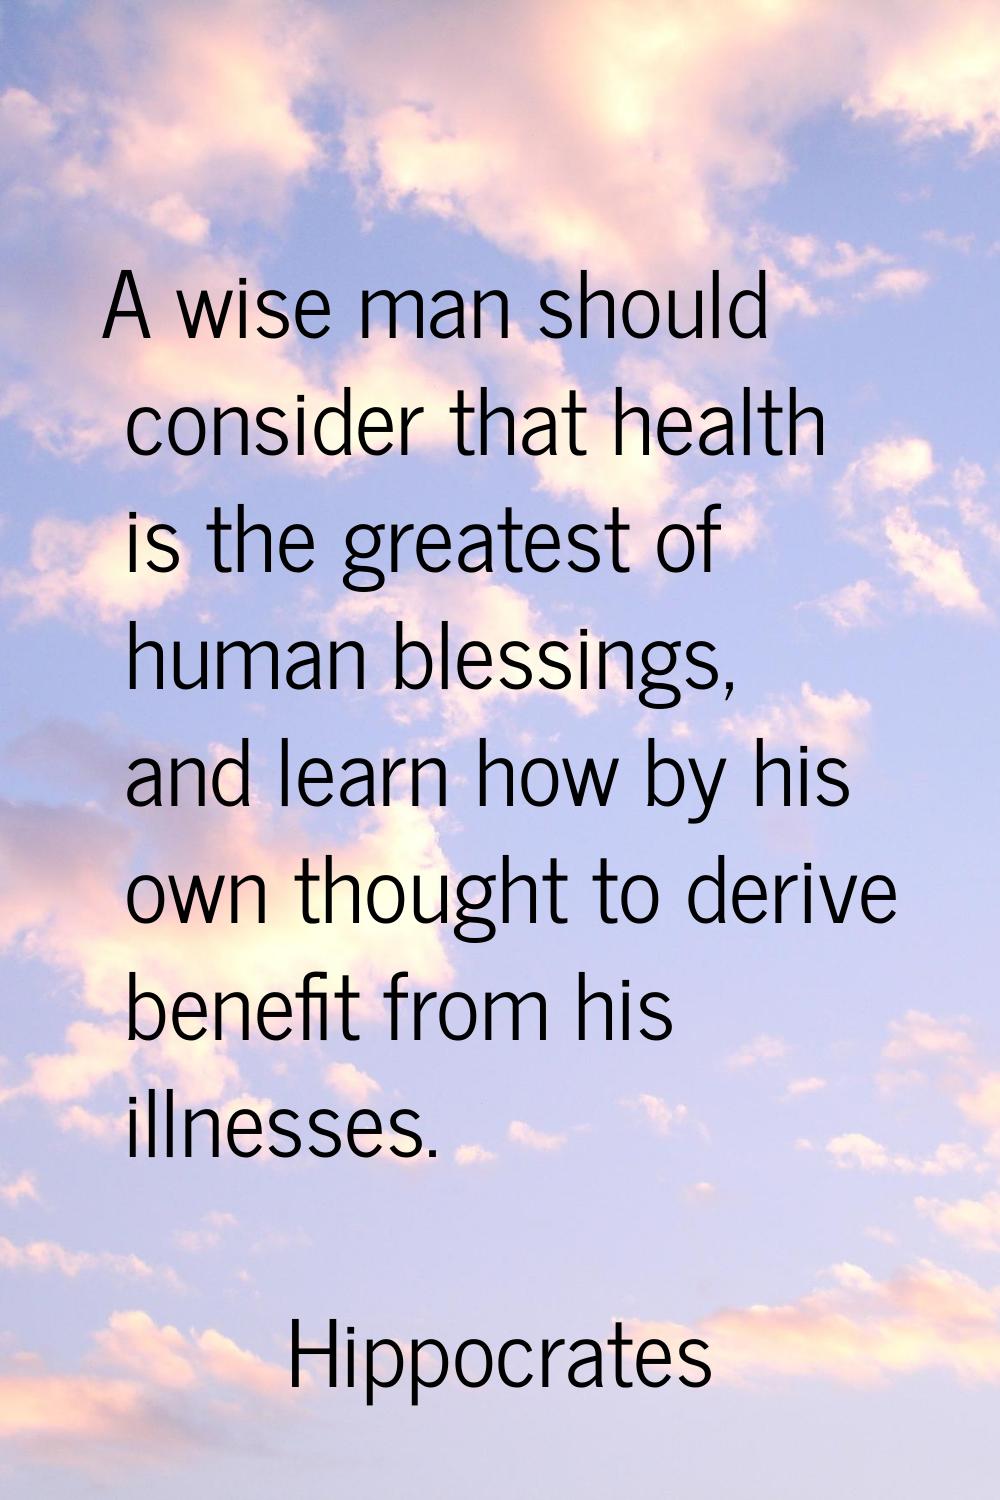 A wise man should consider that health is the greatest of human blessings, and learn how by his own